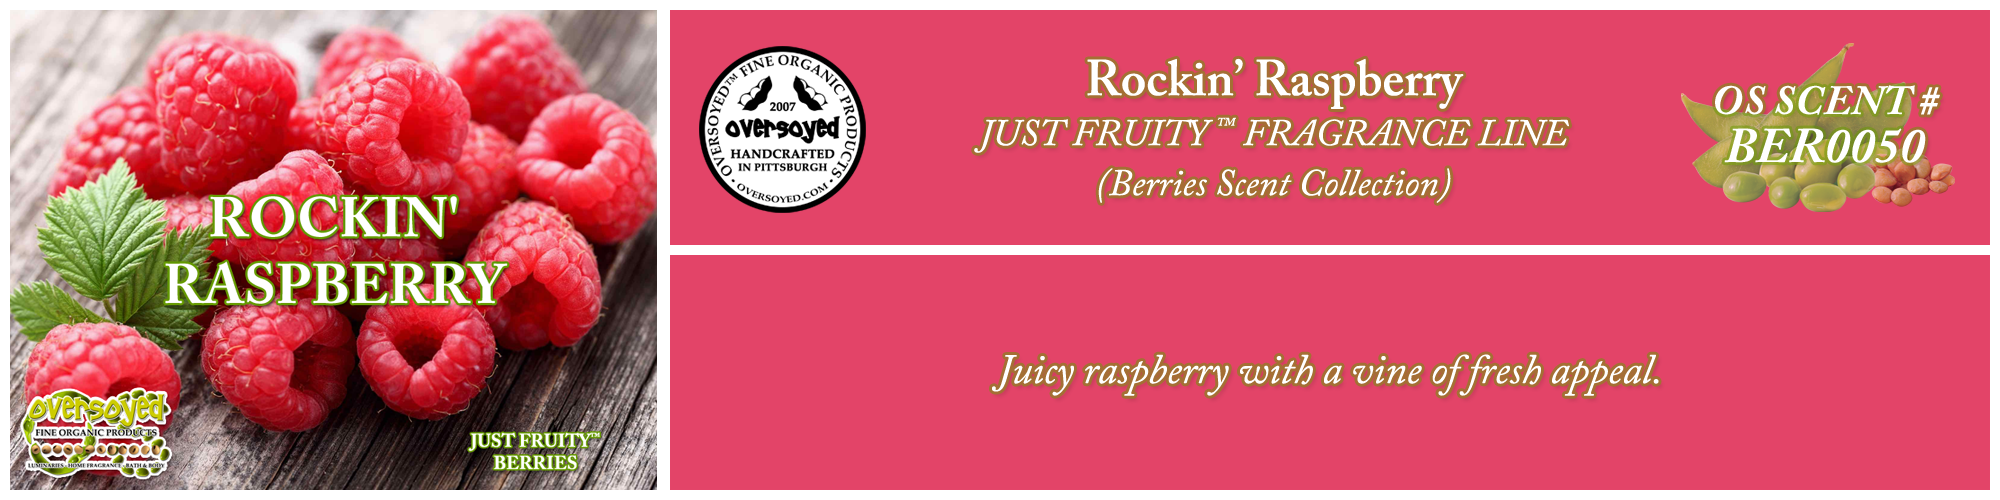 Rockin' Raspberry Handcrafted Products Collection